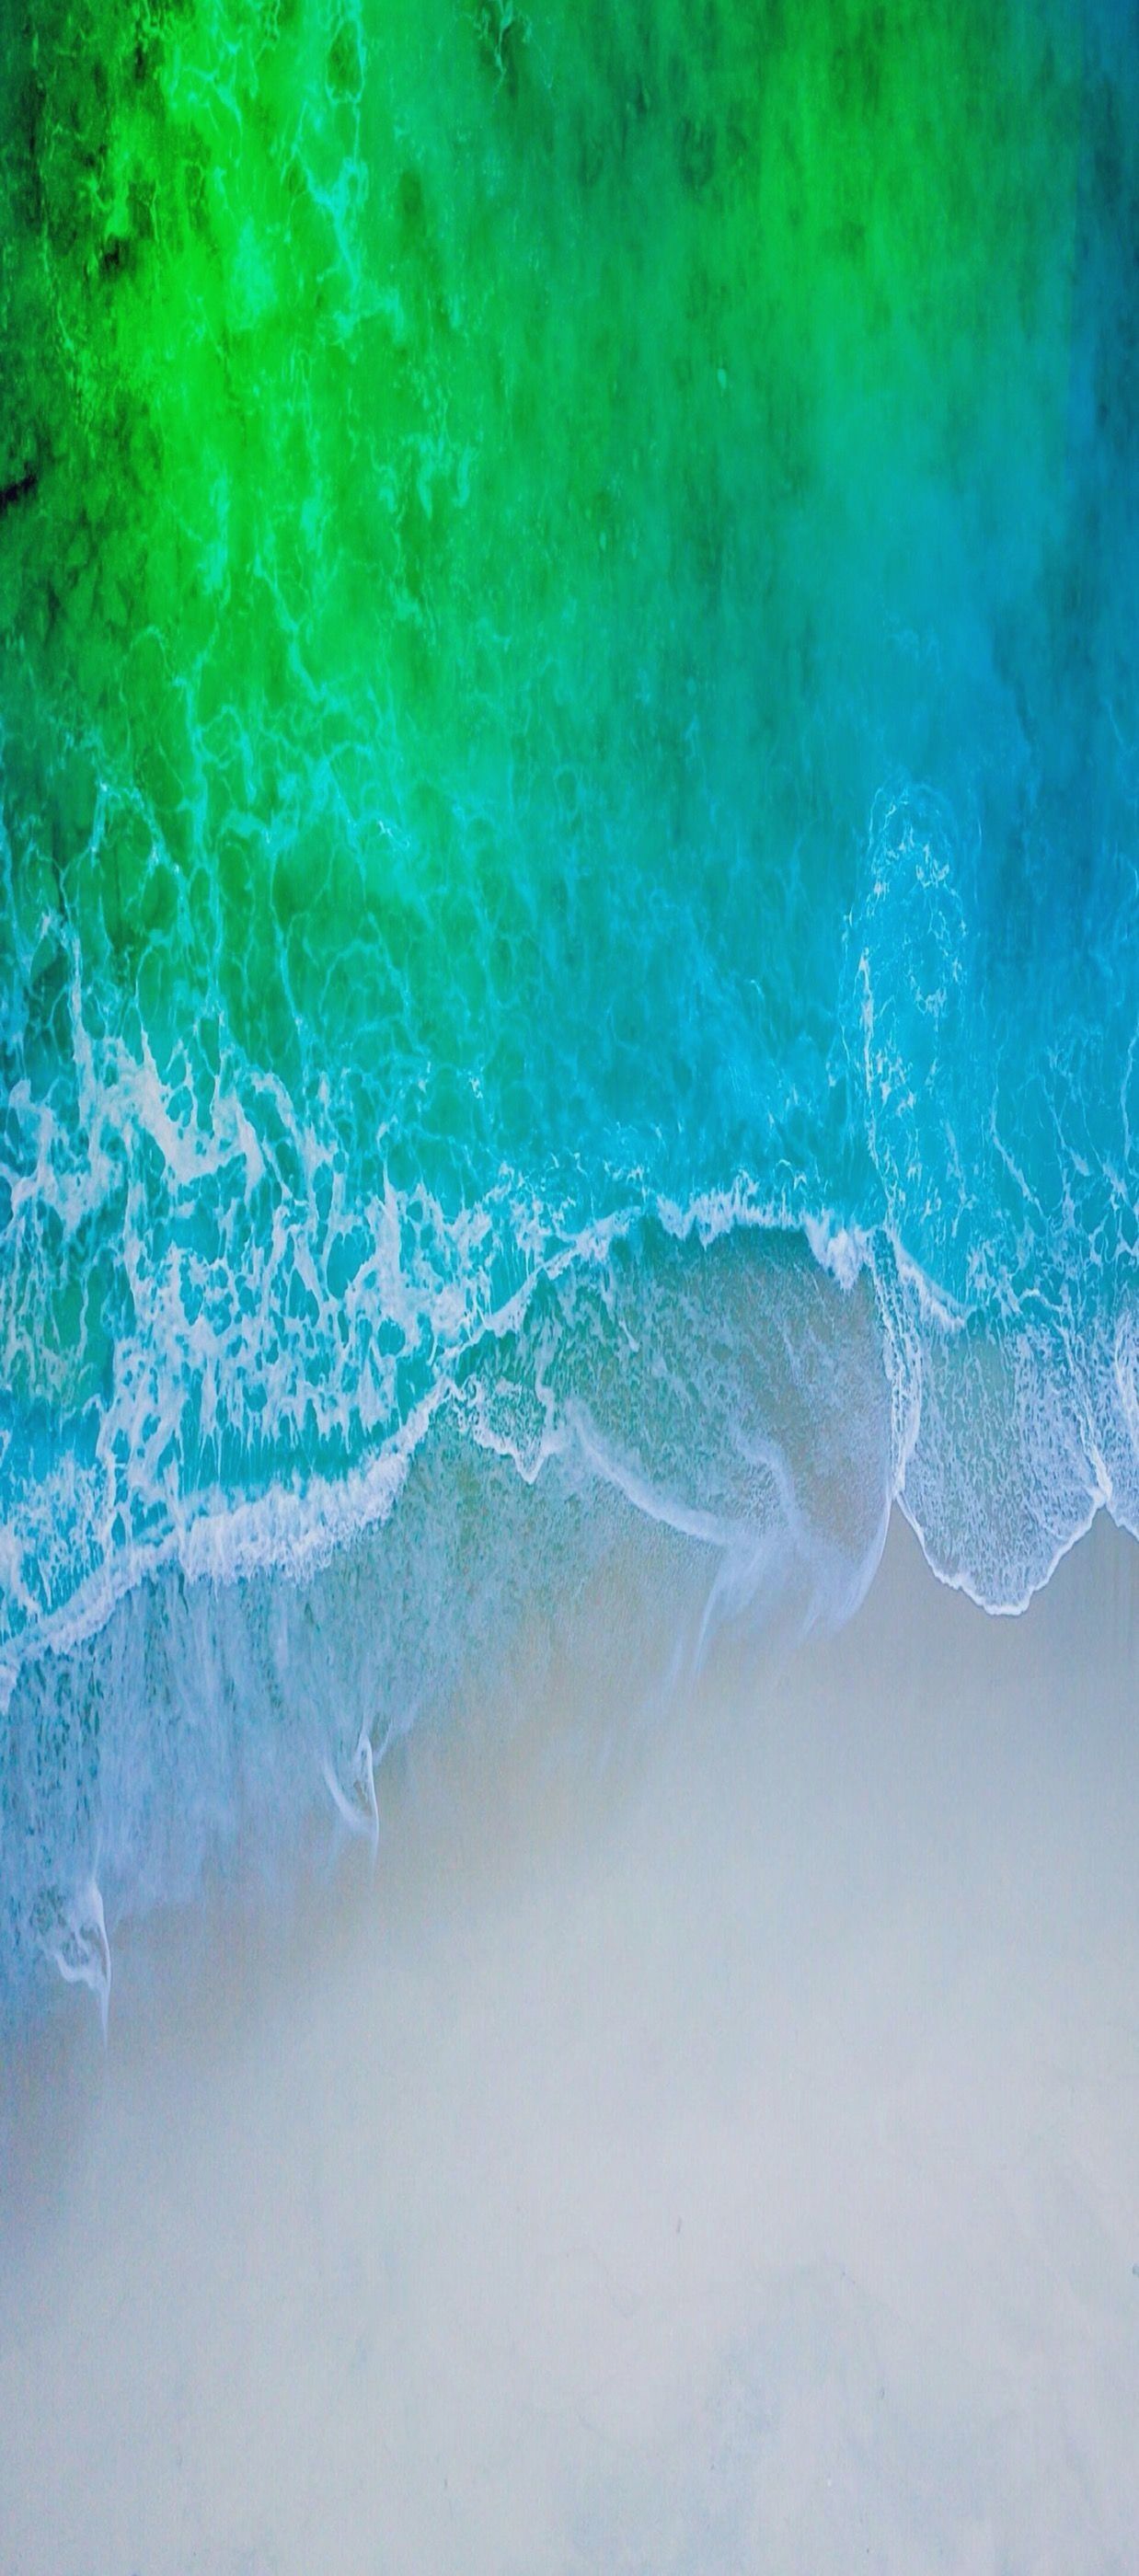 294503 Sea Water Wave Blue Nature Apple iPhone 11 background 828x1792   Rare Gallery HD Wallpapers